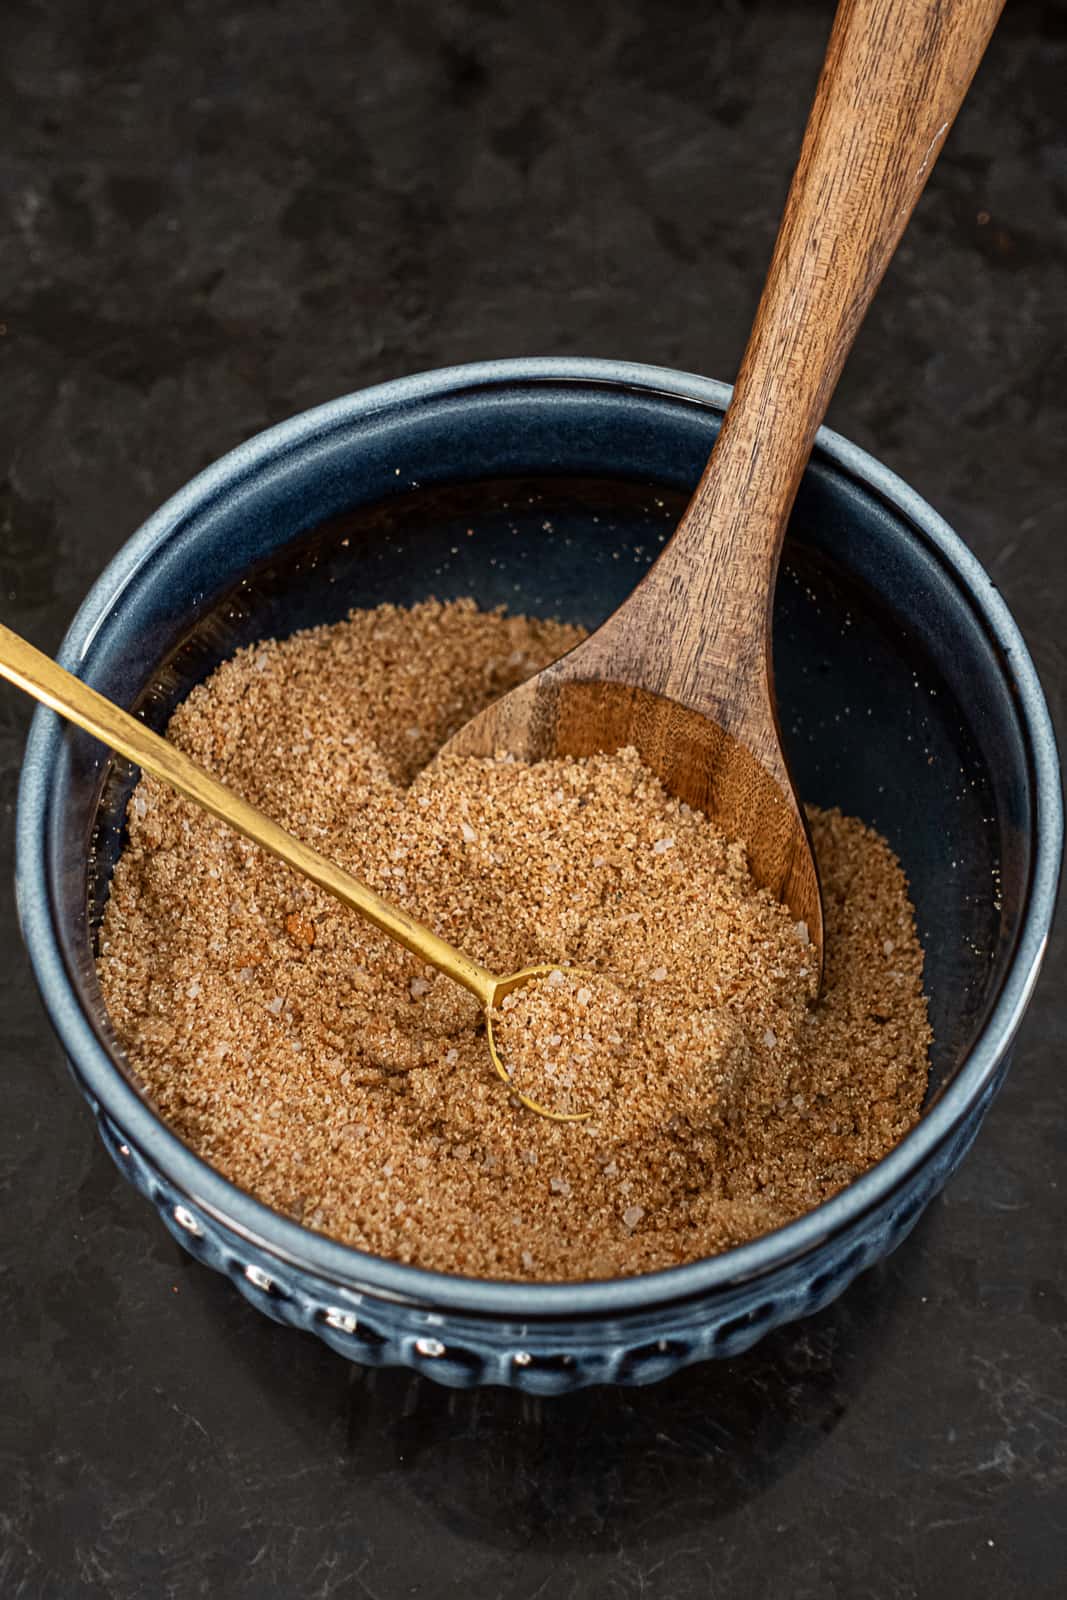 Homemade pork rib spice blend in a bowl with mixing spoons